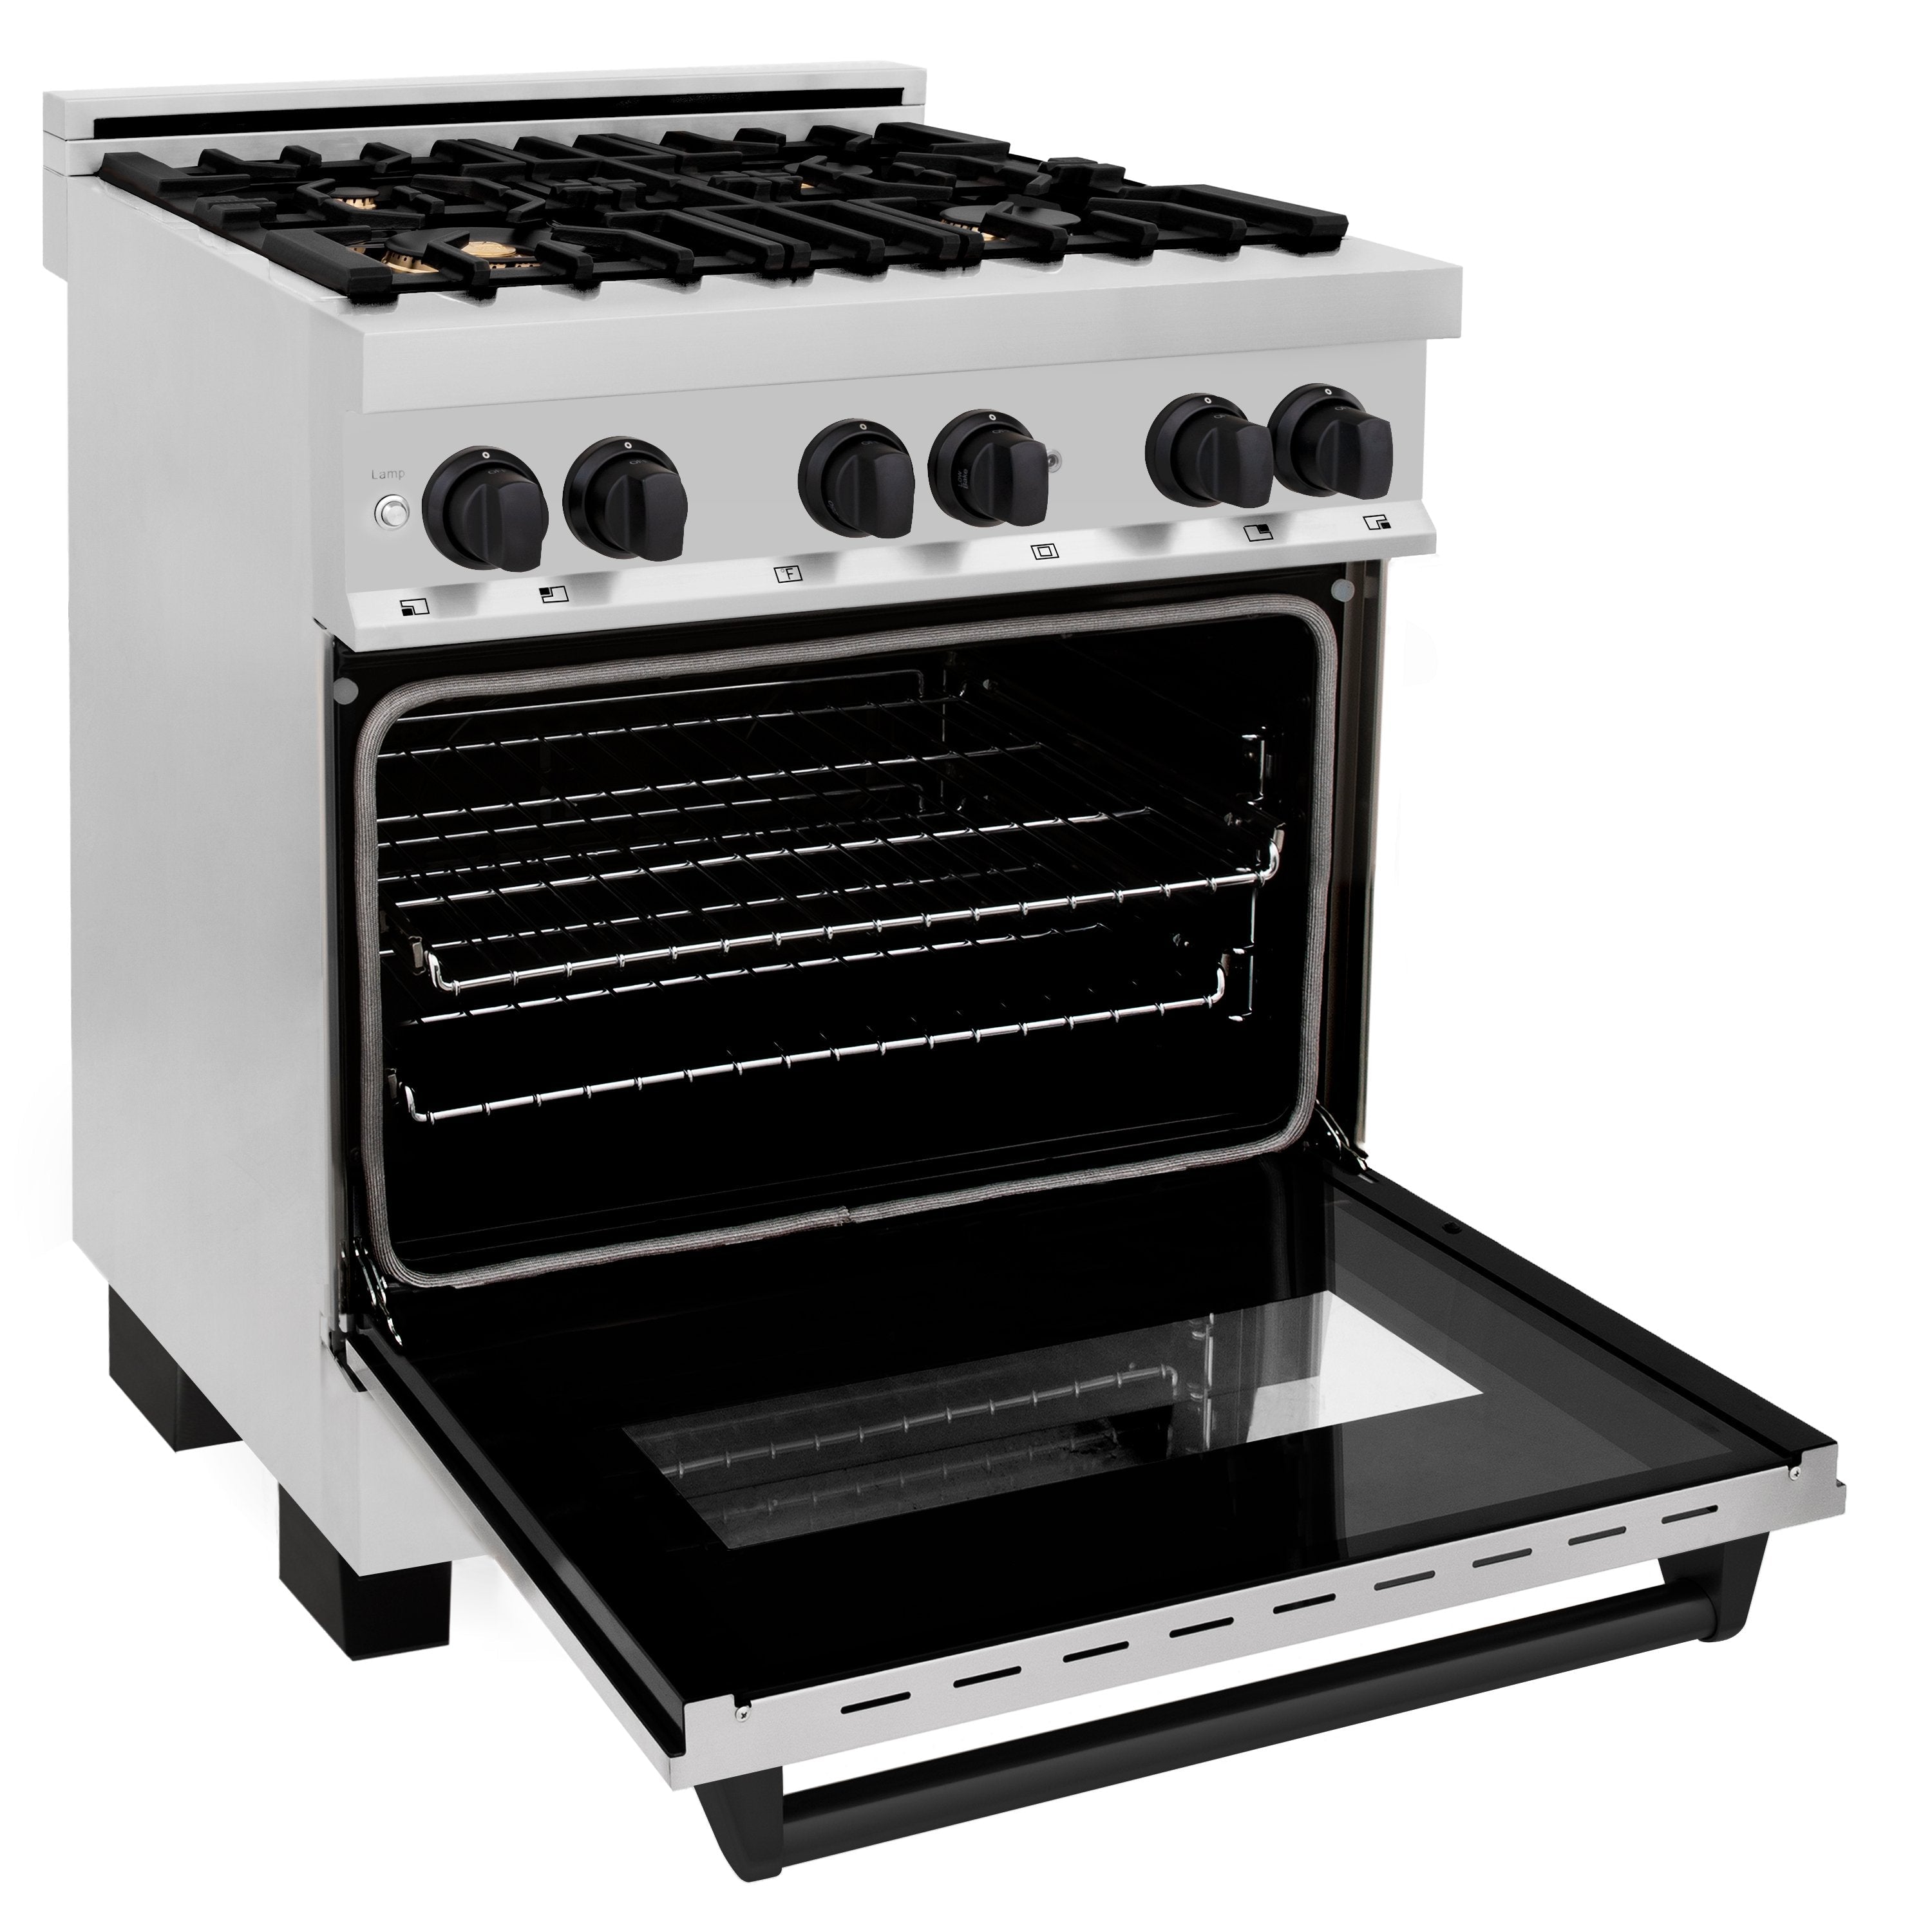 ZLINE Autograph Edition 30" 4.0 cu. ft. Dual Fuel Range with Gas Stove and Electric Oven in Stainless Steel with Accents - RAZ-30